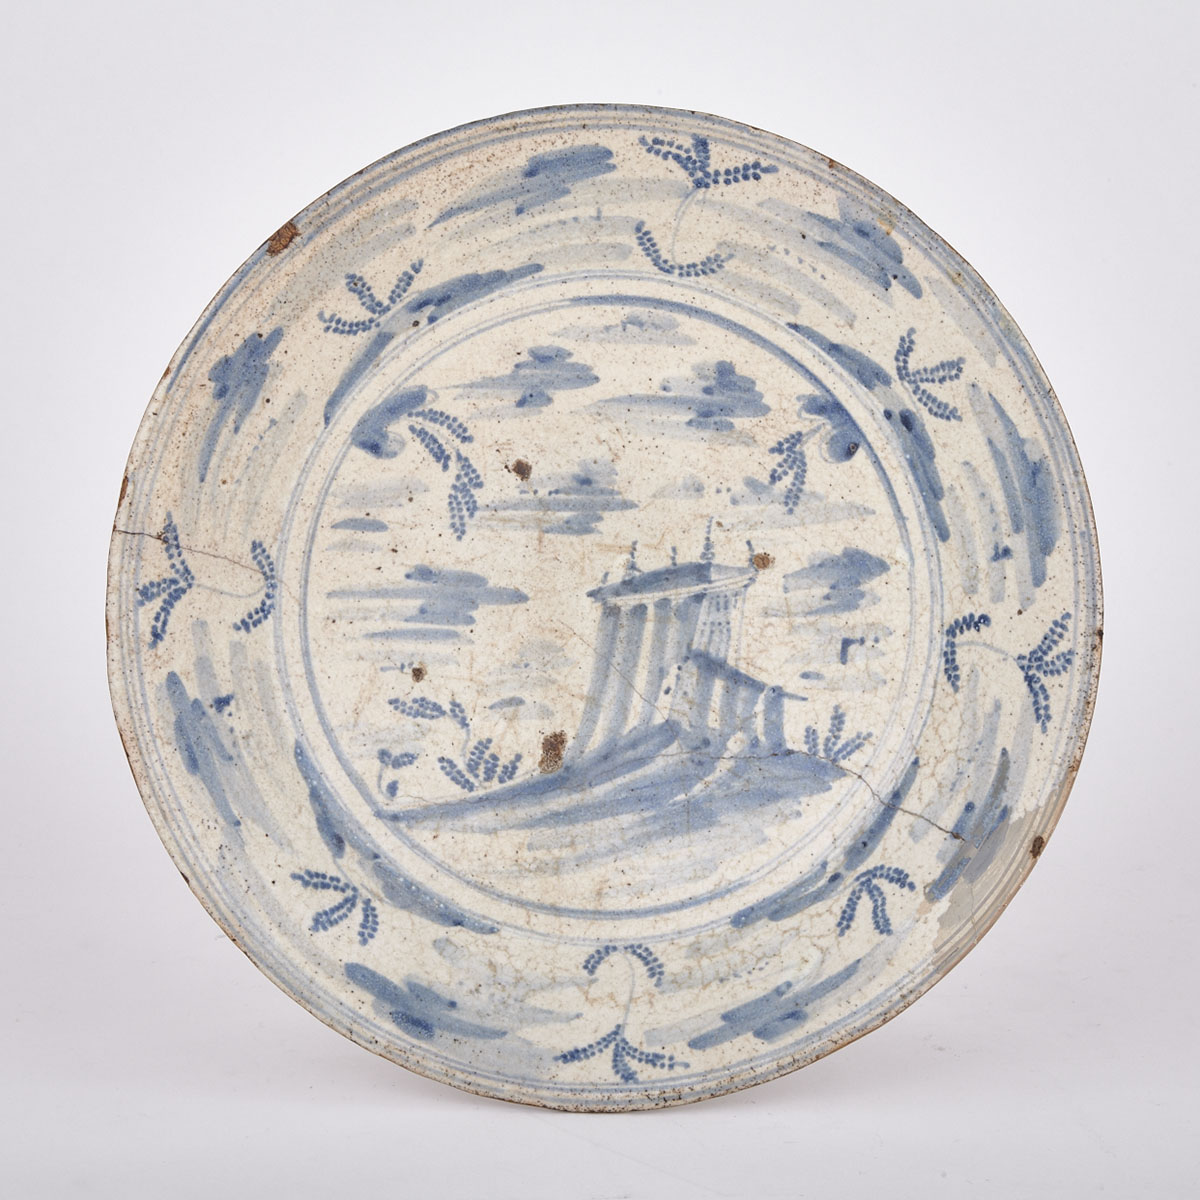 Large Blue and White Ceramic Shallow Bowl, Probably Middle Eastern, 16th-18th Century